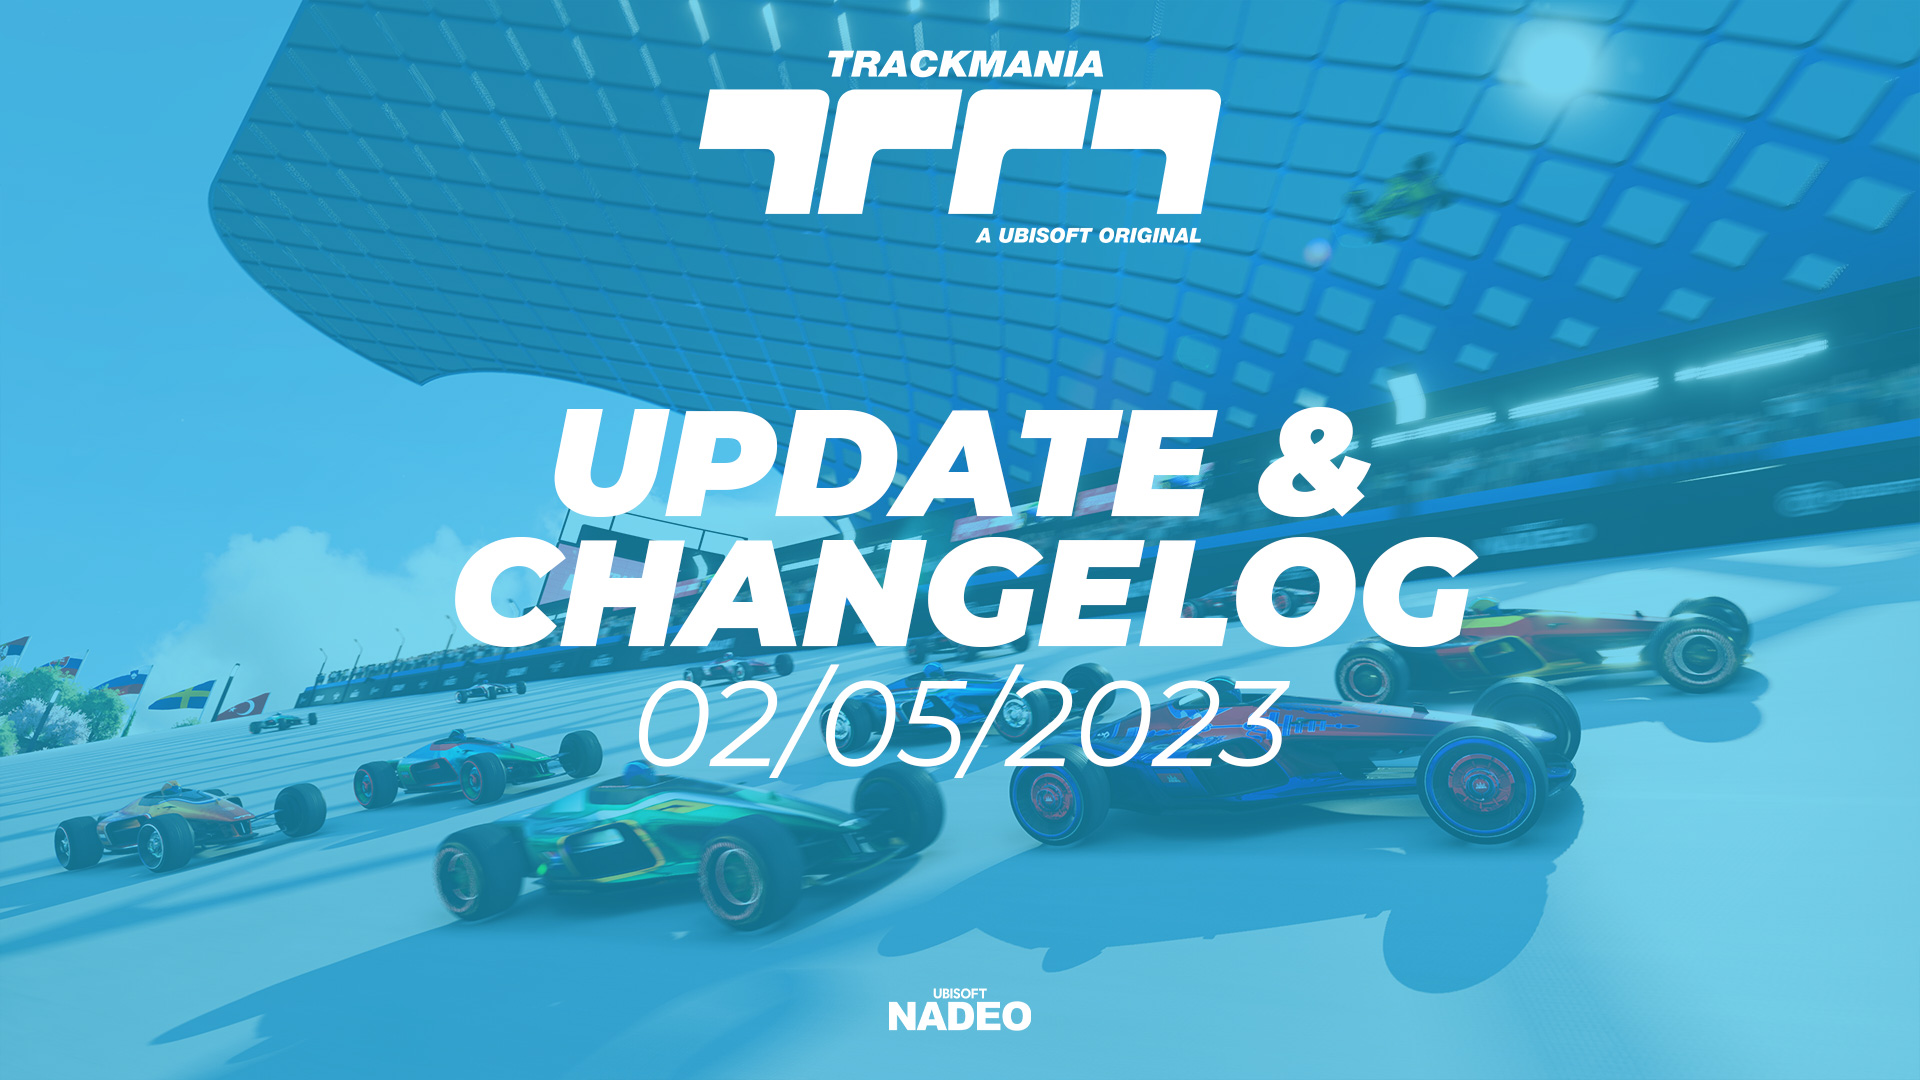 TRACKMANIA UPDATE & CHANGELOG – MAY 2nd 2023